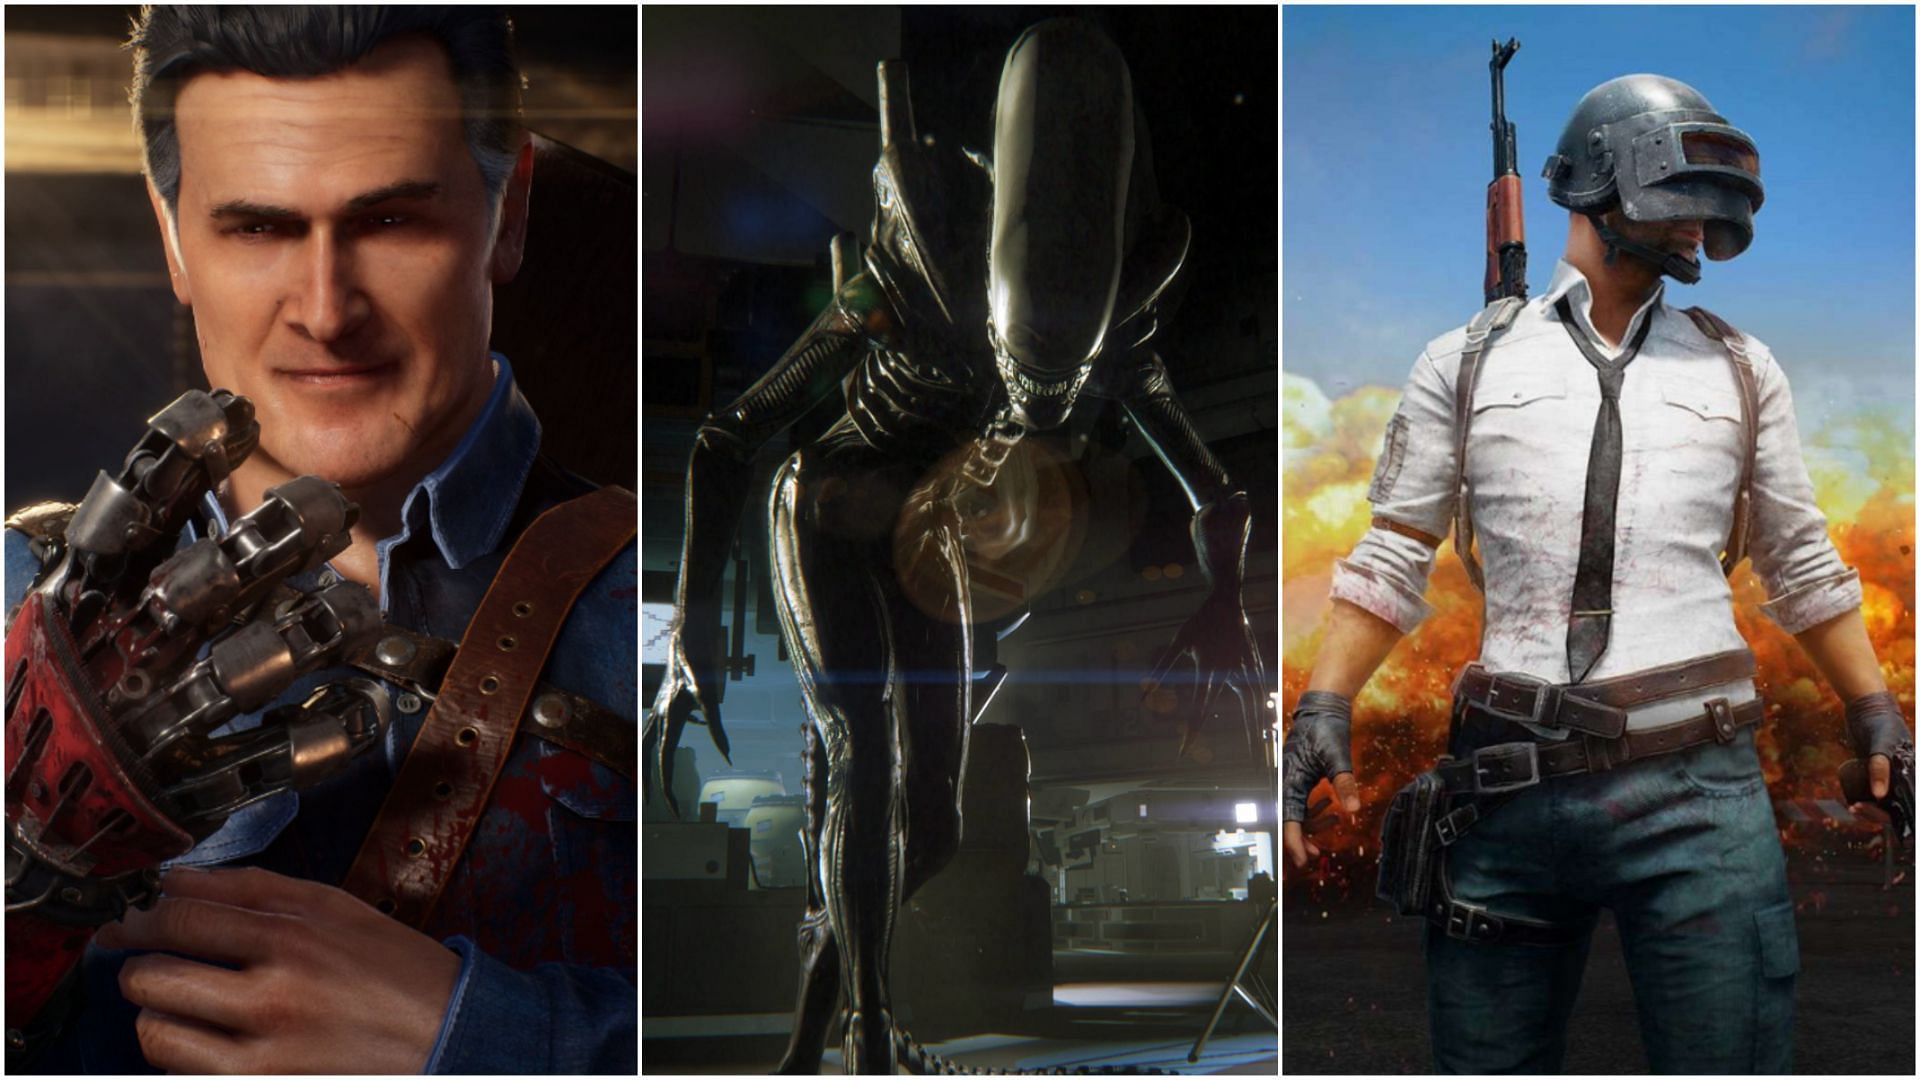 Evil Dead, Alien: Isolation &amp; PUBG are some video games inspired from pop culture (Images via Saber Interactive, Sega, and Krafton)